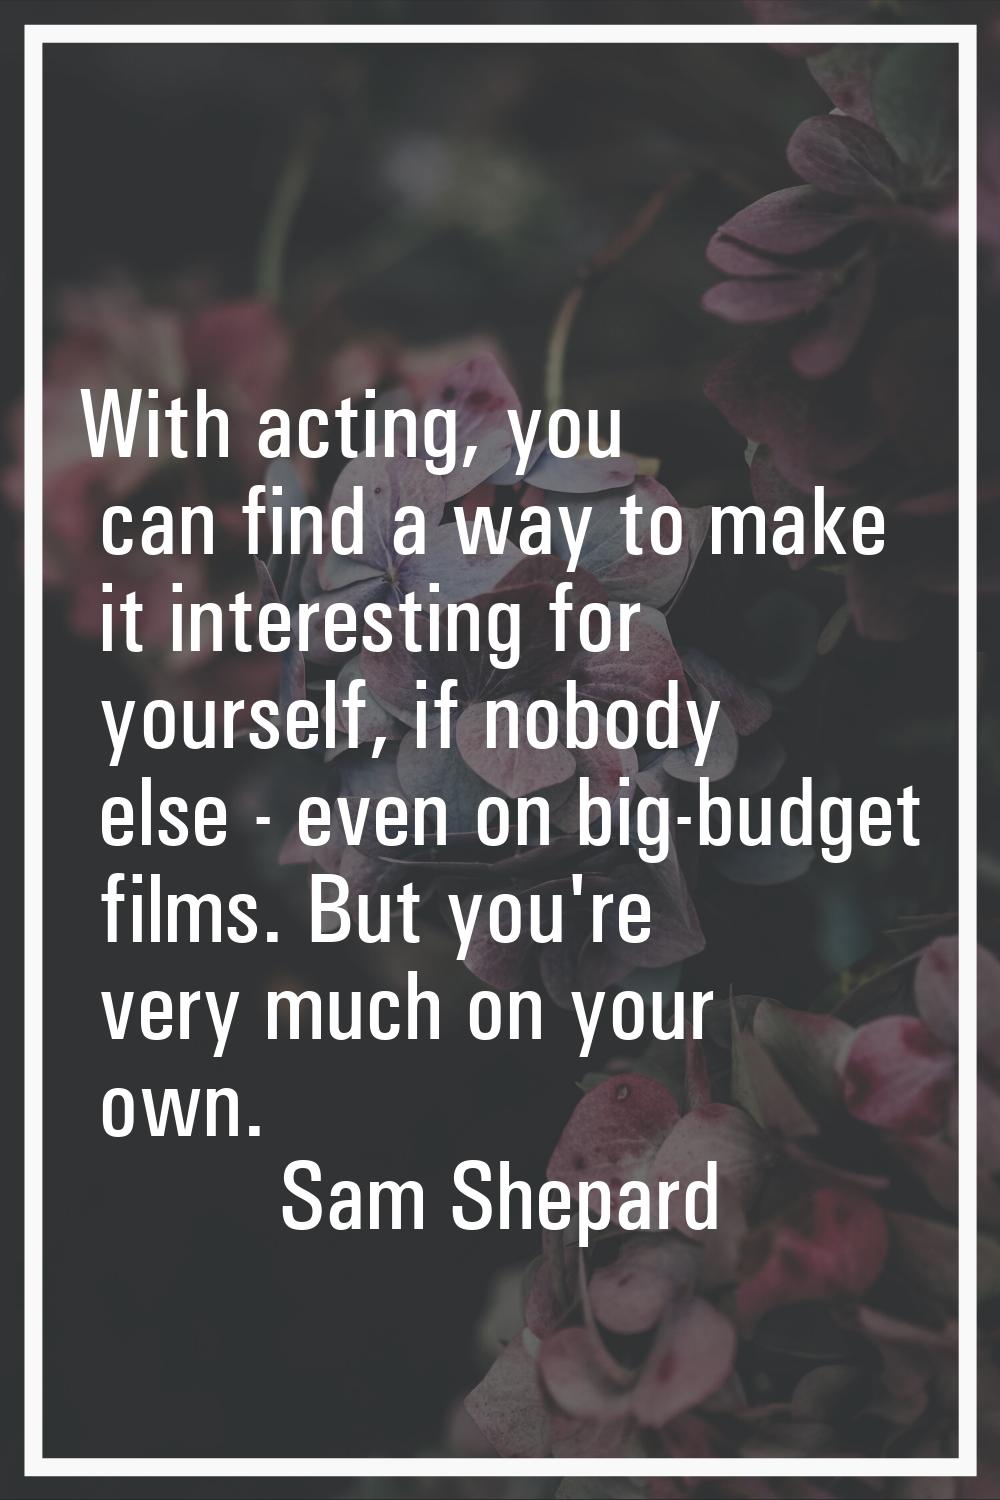 With acting, you can find a way to make it interesting for yourself, if nobody else - even on big-b